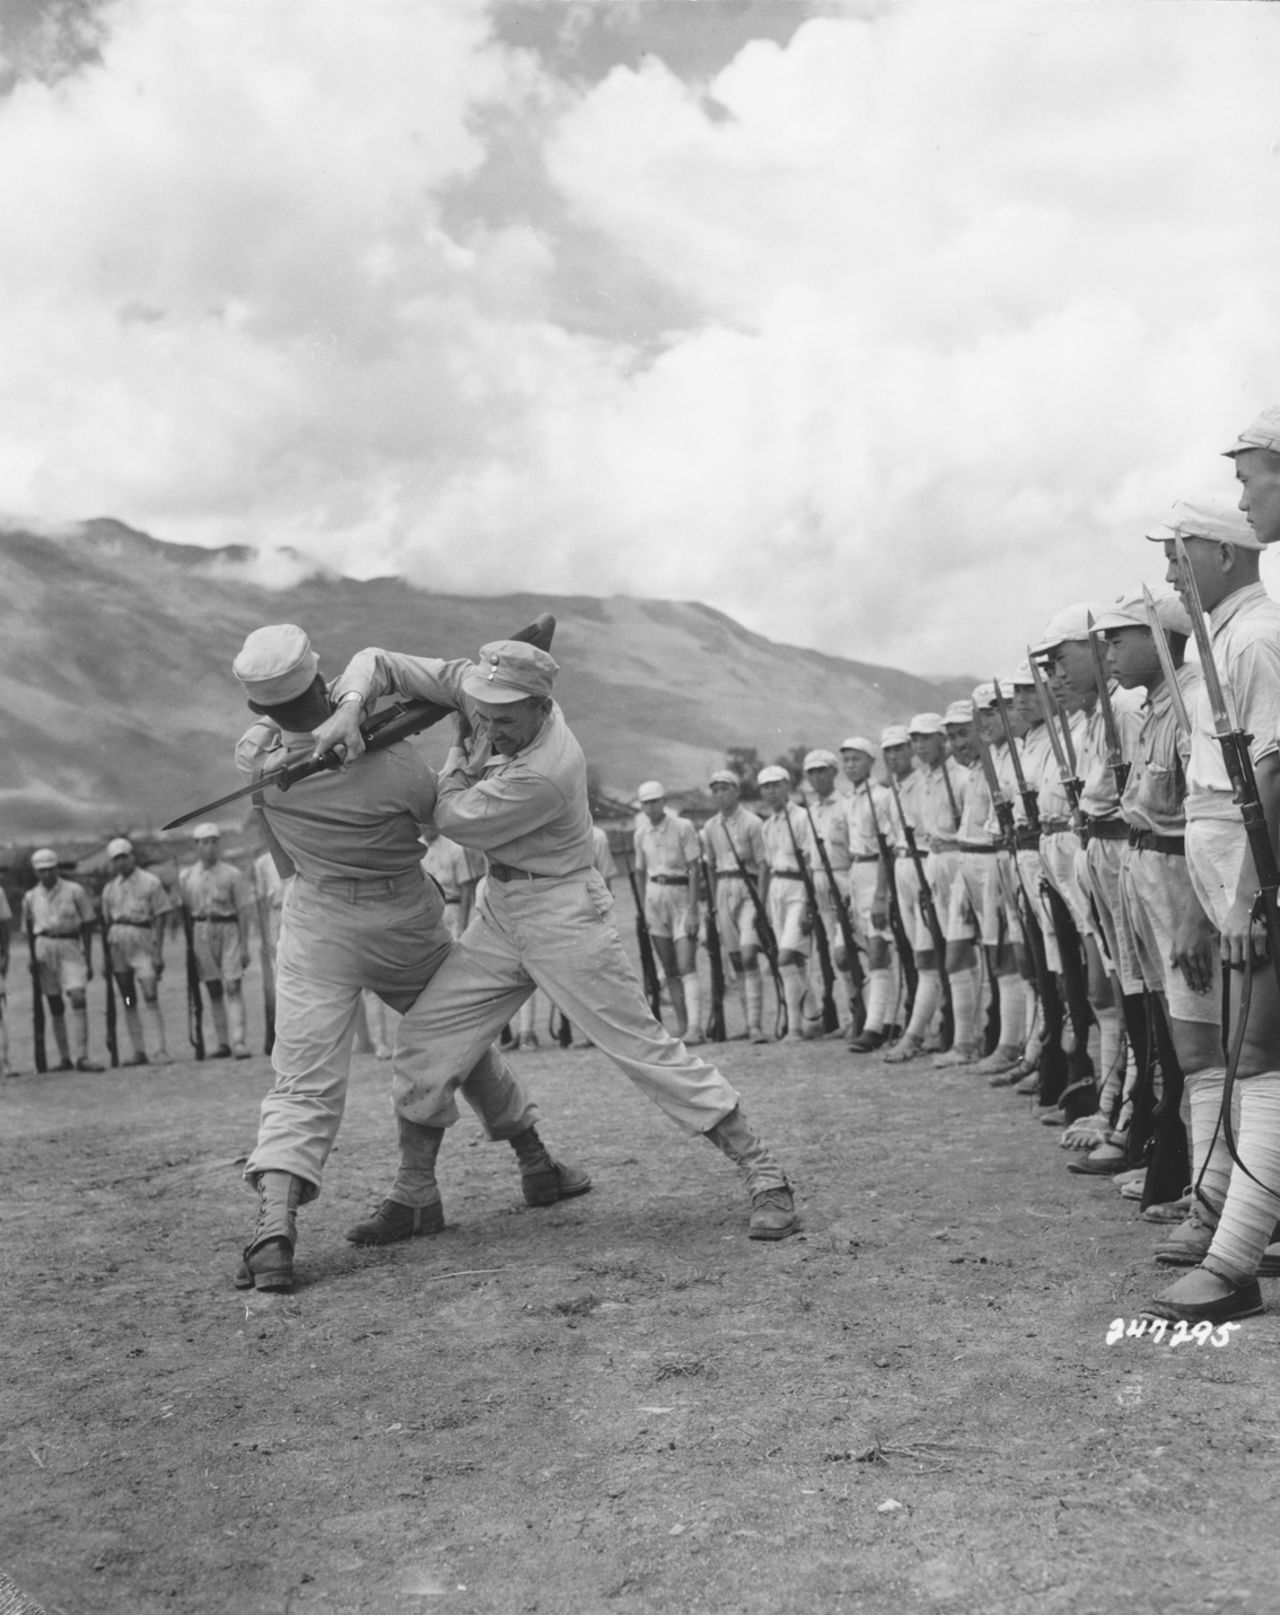 The United States and China were allies during World War II and more than 250,000 Americans served in what was known as the "China-Burma-India" theater. Here, a U.S.  sergeant and a lieutenant, both members of the Y-Force Operations Staff, demonstrate methods of disarming the enemy with a bayonet to Chinese soldiers.